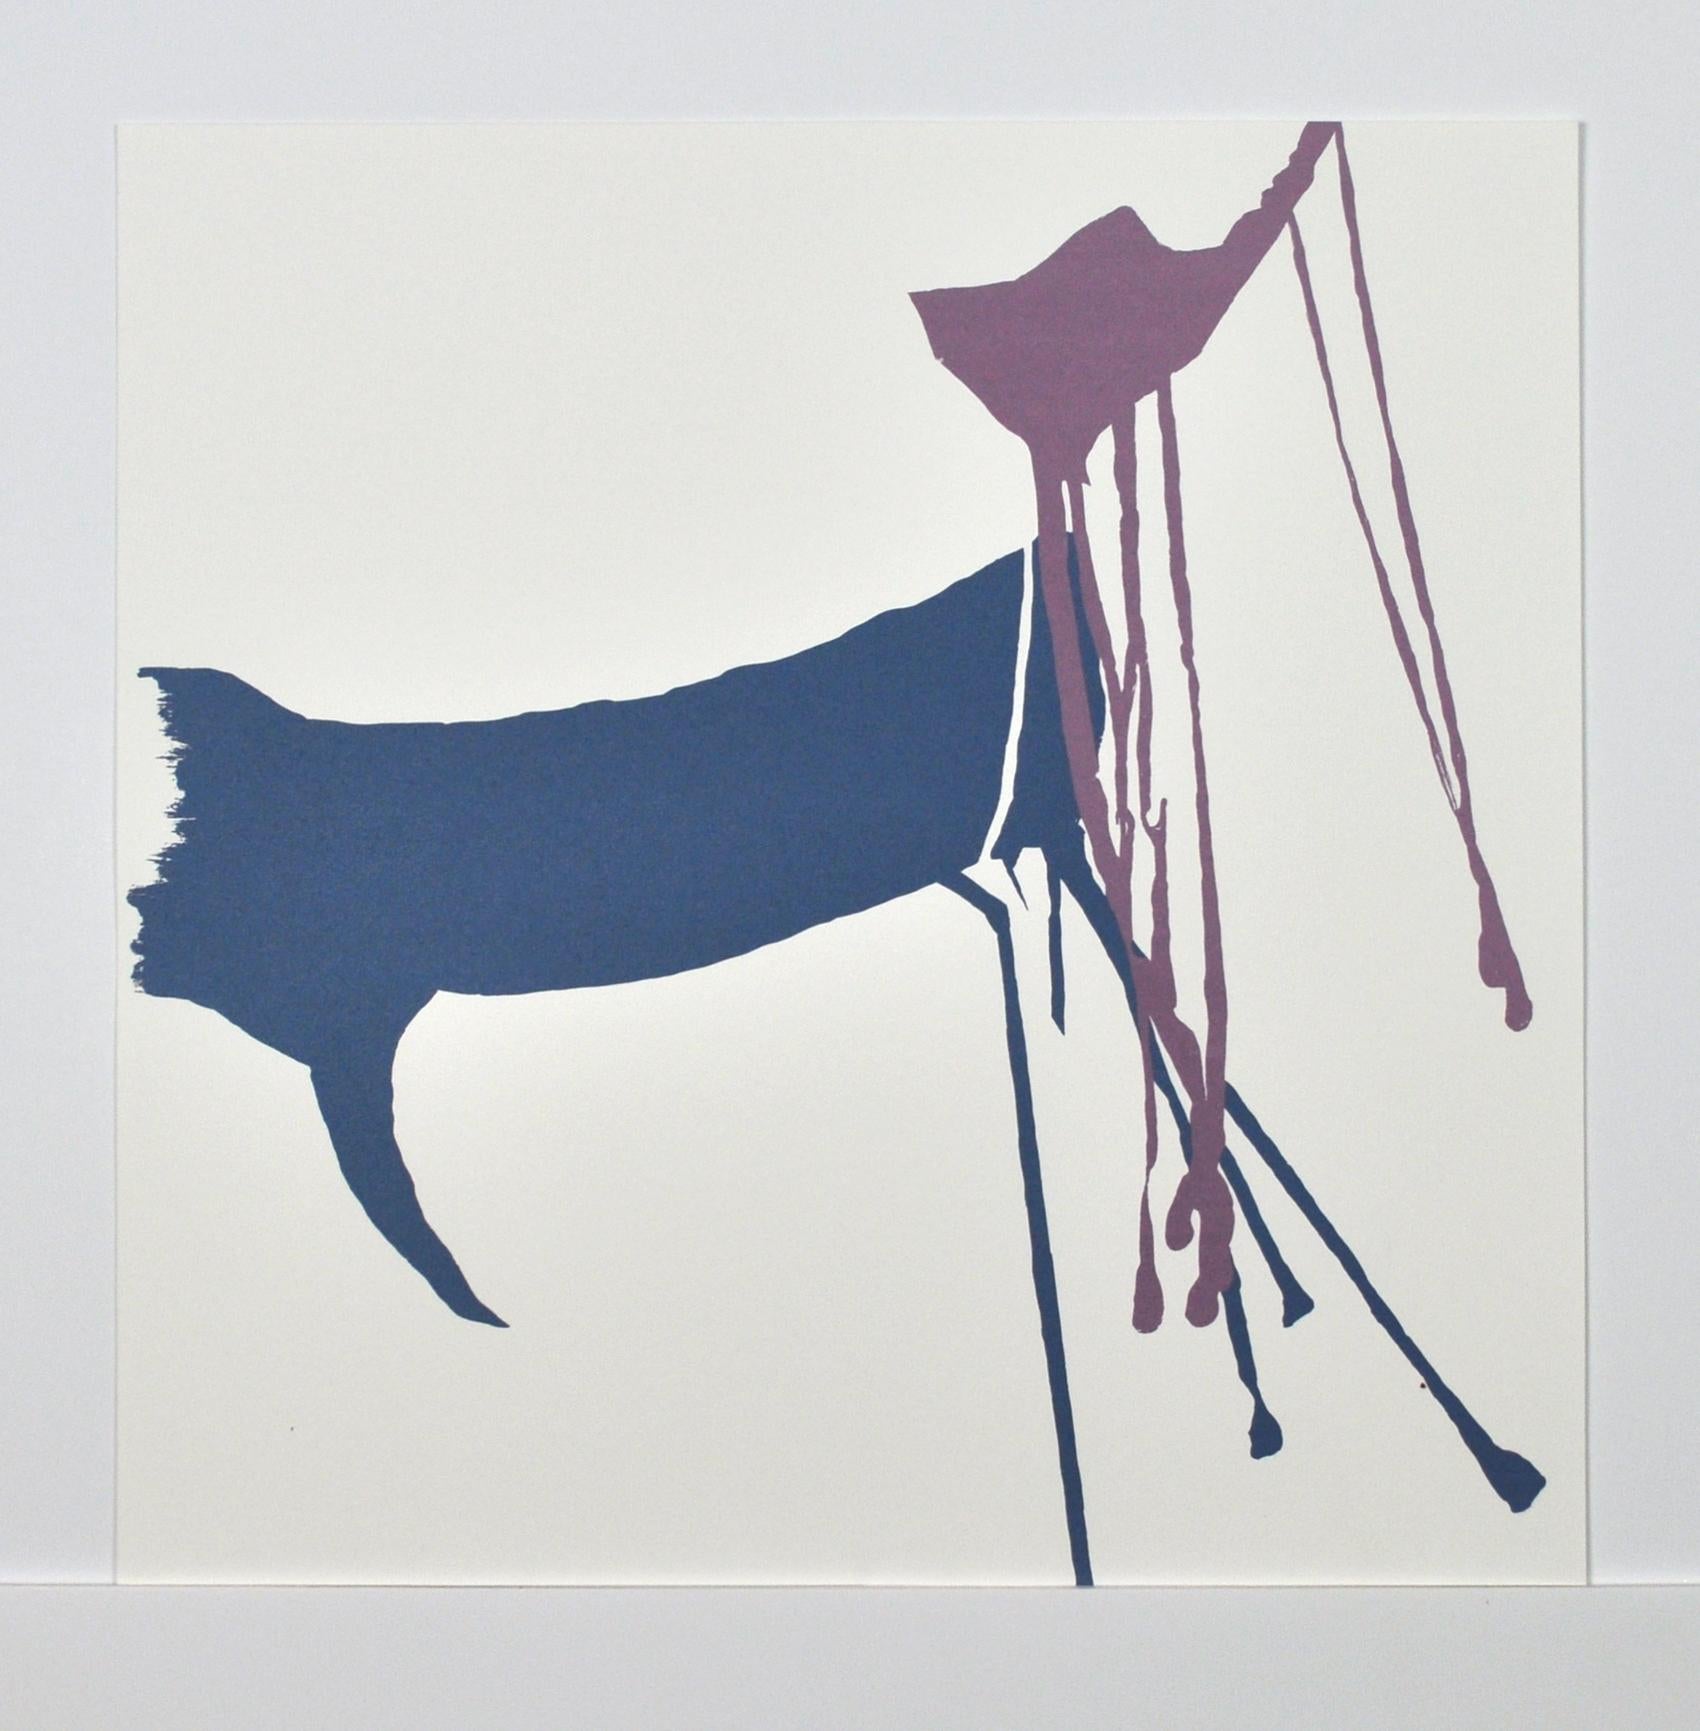 “Tochinishiki Kiyotaka, Sumo 4”  
Anne Marie Ploug (1966-)
Screen Print, 2006
Numbered 4/48, signed.  Artsize: 48 cm H x 48 cm W, unframed.

This piece comes from a series of 48 artworks made by four Danish artists, 12 each in a limited edition of